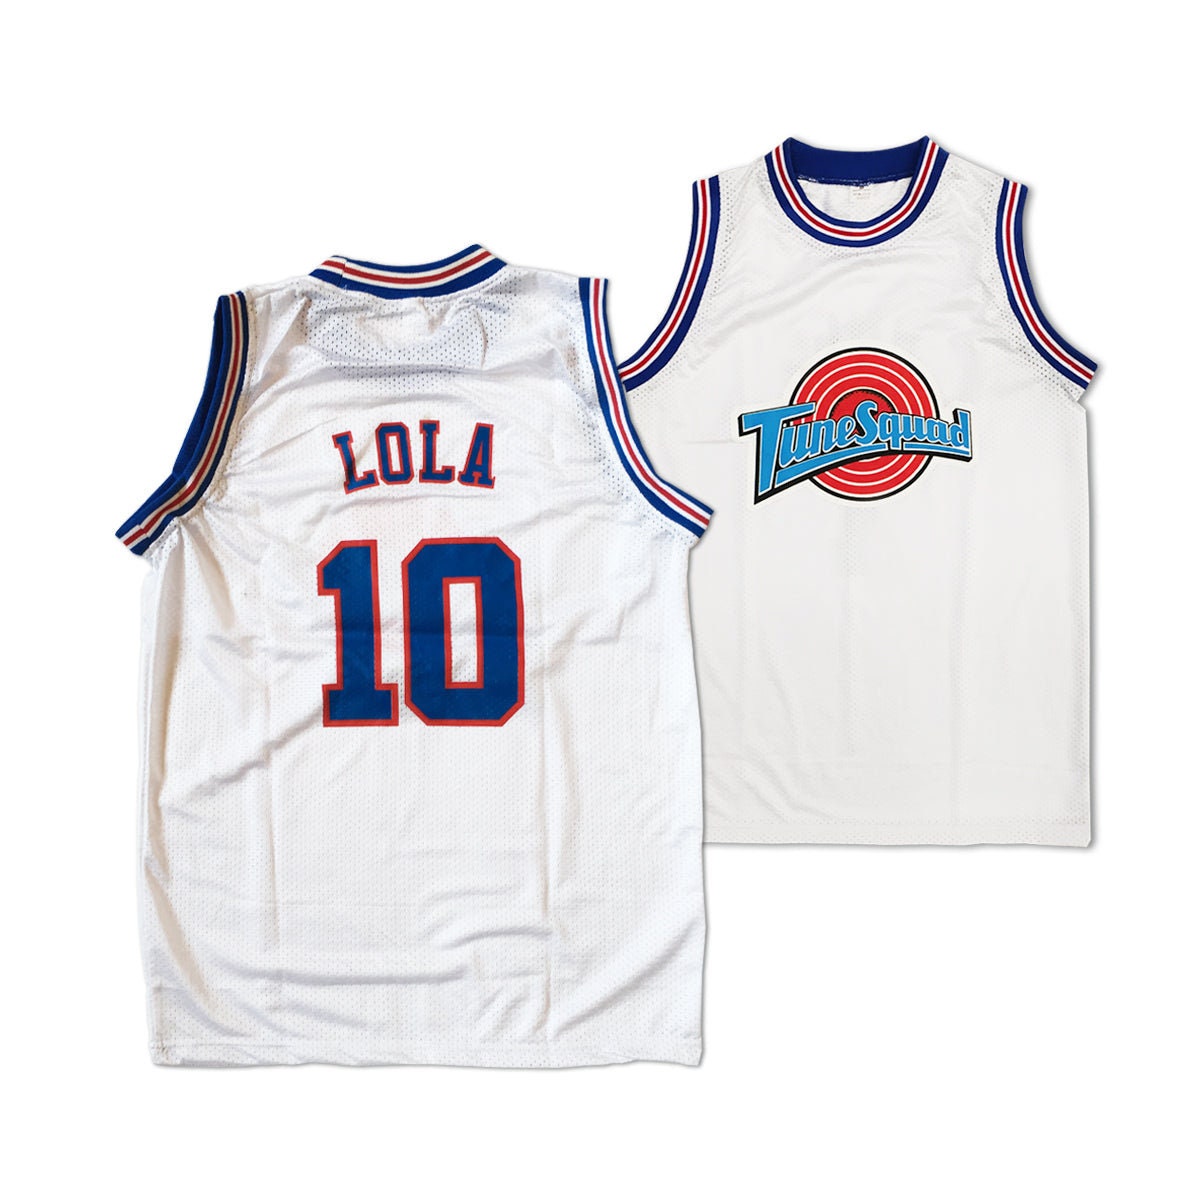 Youth Basketball Jersey LOLA 10#Bunny Space Movie Jerseys for Kids Basketball Shirt for Party S-XL White/Black 